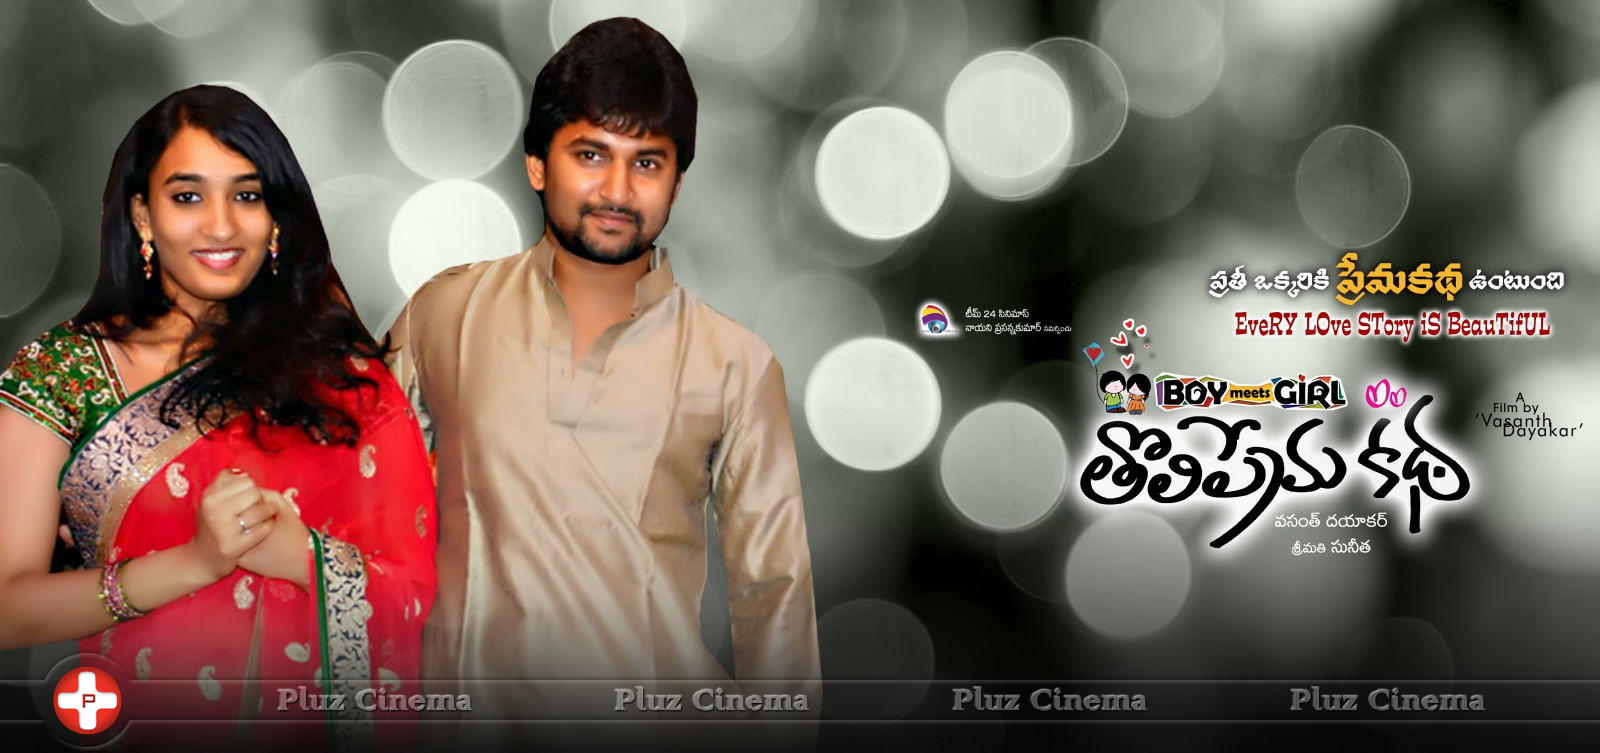 Boy meets Girl Tholiprema Katha Movie New Posters | Picture 735051